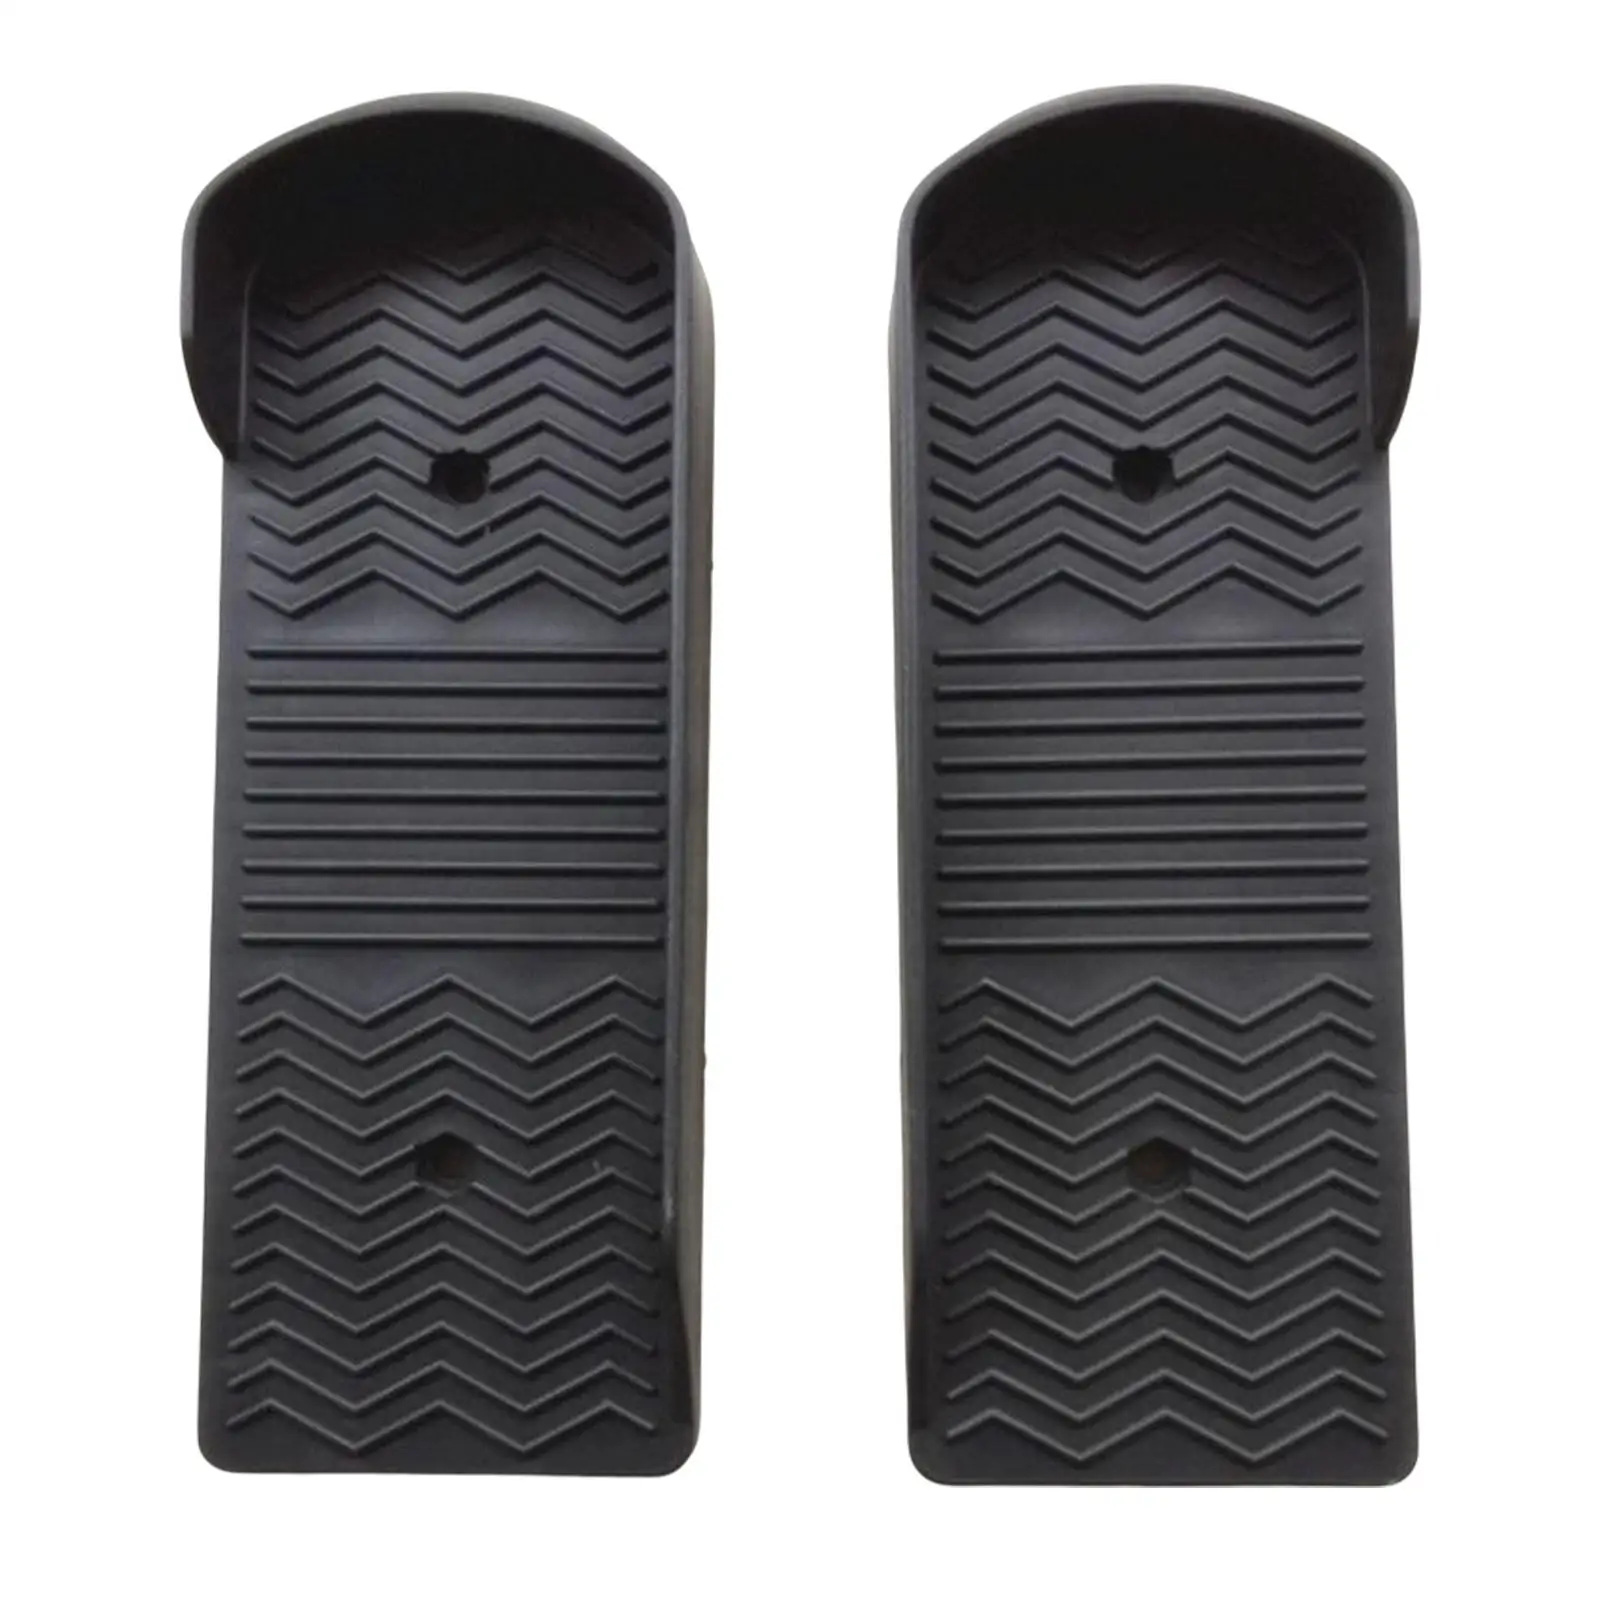 Household Elliptical Machine Foot Pedals Walking Machine Pedals for Home Accessories